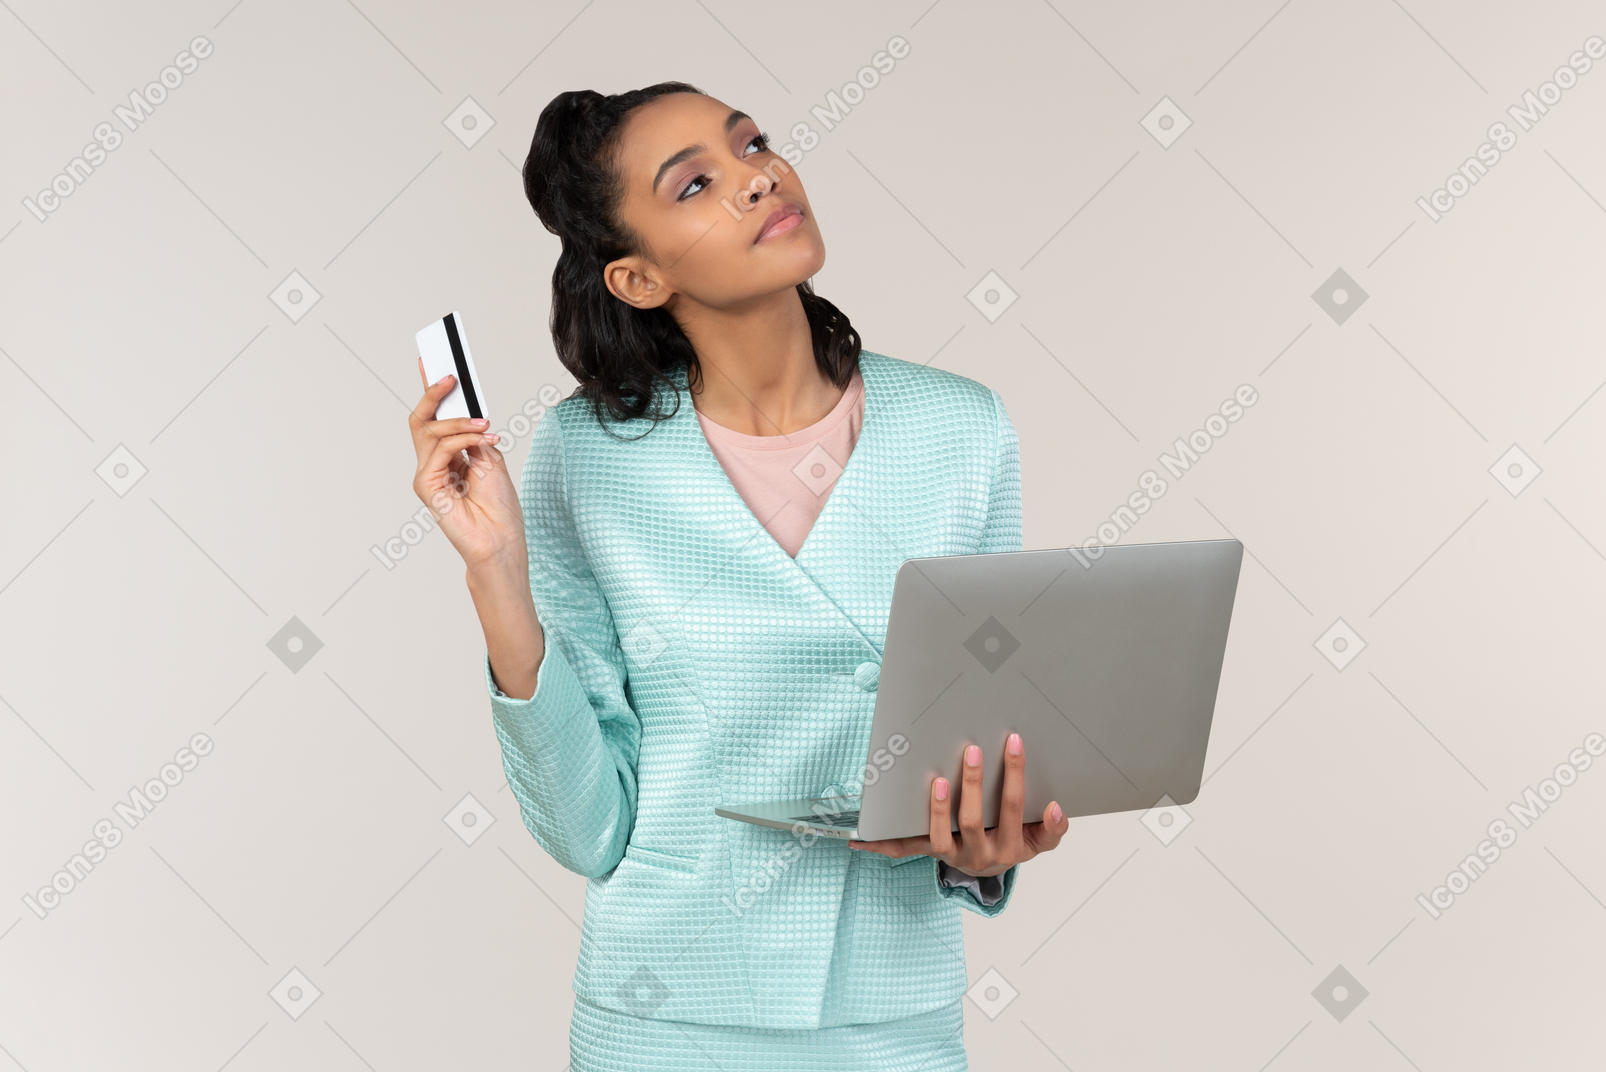 Pensive young afrowoman holding laptop and bank card